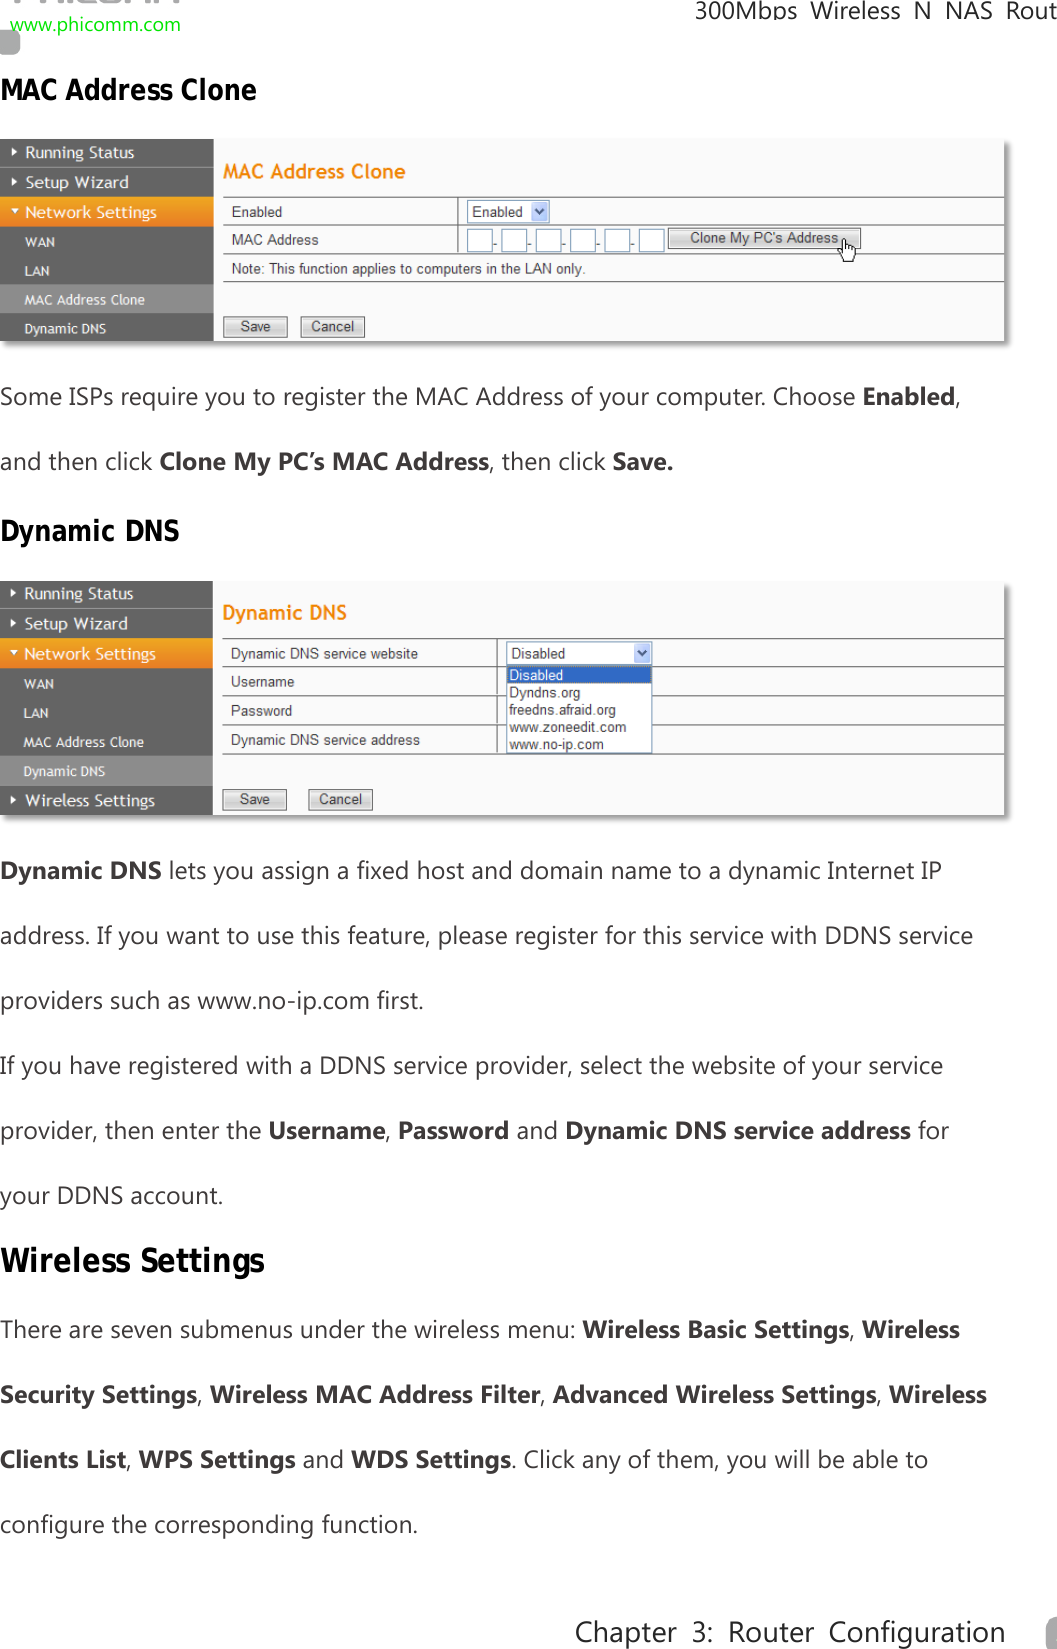                                                            300Mbps Wireless N NAS  Rout www.phicomm.com 23 Chapter 3: Router Configuration  MAC Address Clone  Some ISPs require you to register the MAC Address of your computer. Choose Enabled, and then click Clone My PC’s MAC Address, then click Save. Dynamic DNS  Dynamic DNS lets you assign a fixed host and domain name to a dynamic Internet IP address. If you want to use this feature, please register for this service with DDNS service providers such as www.no-ip.com first. If you have registered with a DDNS service provider, select the website of your service provider, then enter the Username, Password and Dynamic DNS service address for your DDNS account. Wireless Settings There are seven submenus under the wireless menu: Wireless Basic Settings, Wireless Security Settings, Wireless MAC Address Filter, Advanced Wireless Settings, Wireless Clients List, WPS Settings and WDS Settings. Click any of them, you will be able to configure the corresponding function.   